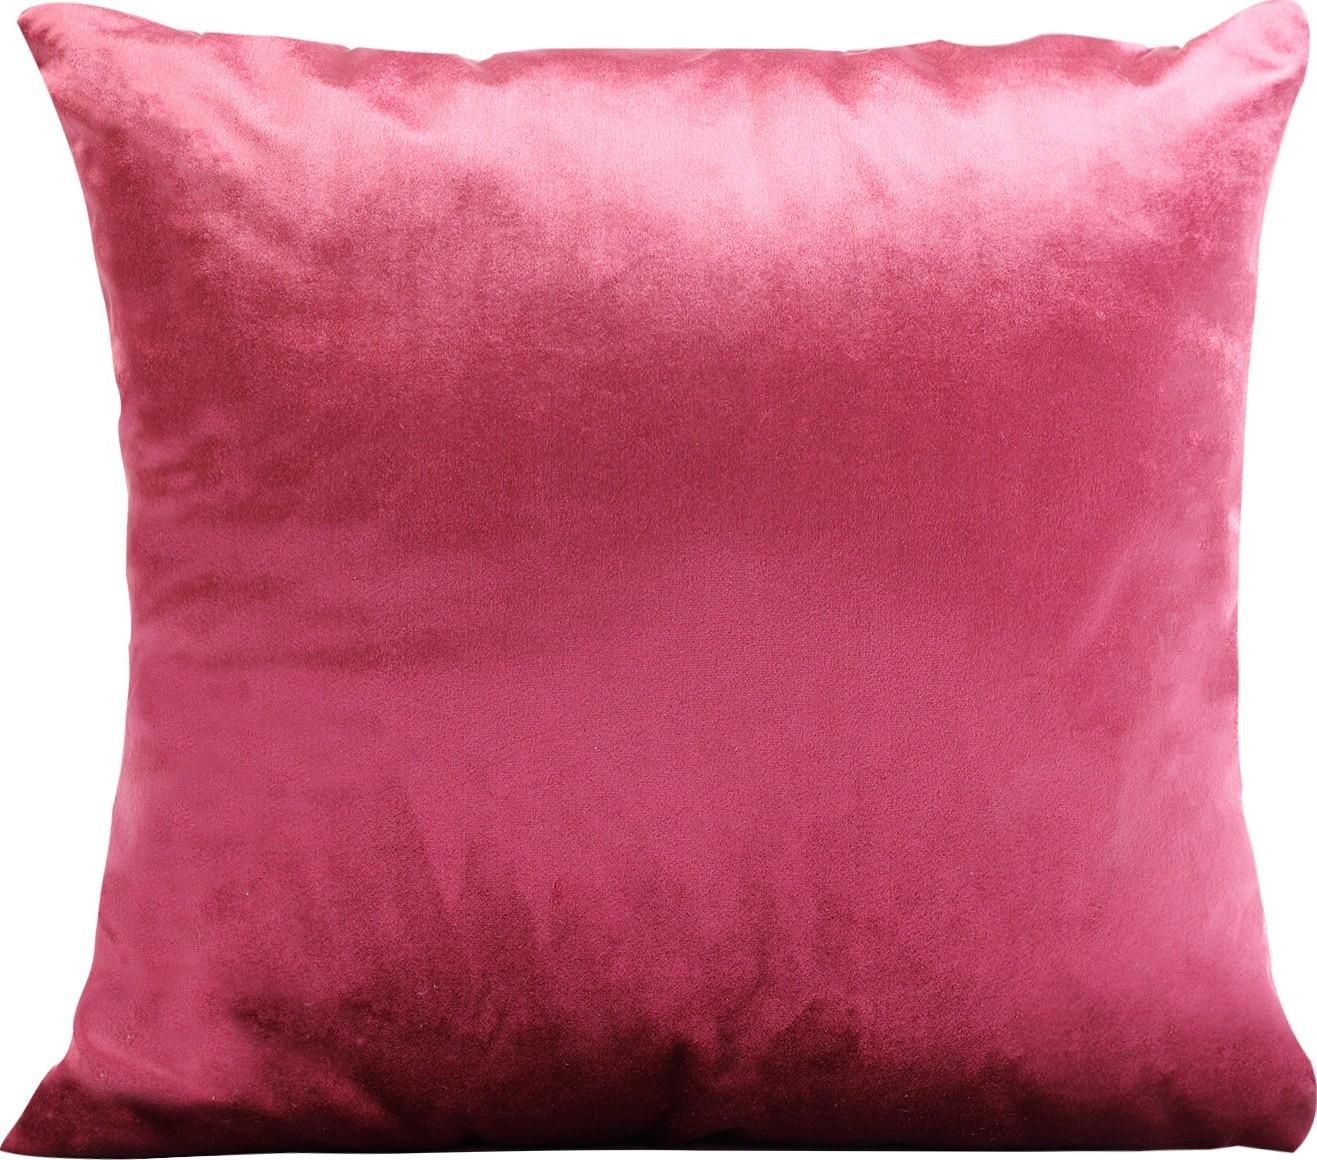 PARRY LIFE Decorative Velvet Cushion Pillow - Decorative Square Pillow Case - Ideal Pillow for Livingroom Sofa Couch Bedroom Car, 44cmx44cm - Square Cushion Pillow, Perfect to Match any Home Dcor-MARO